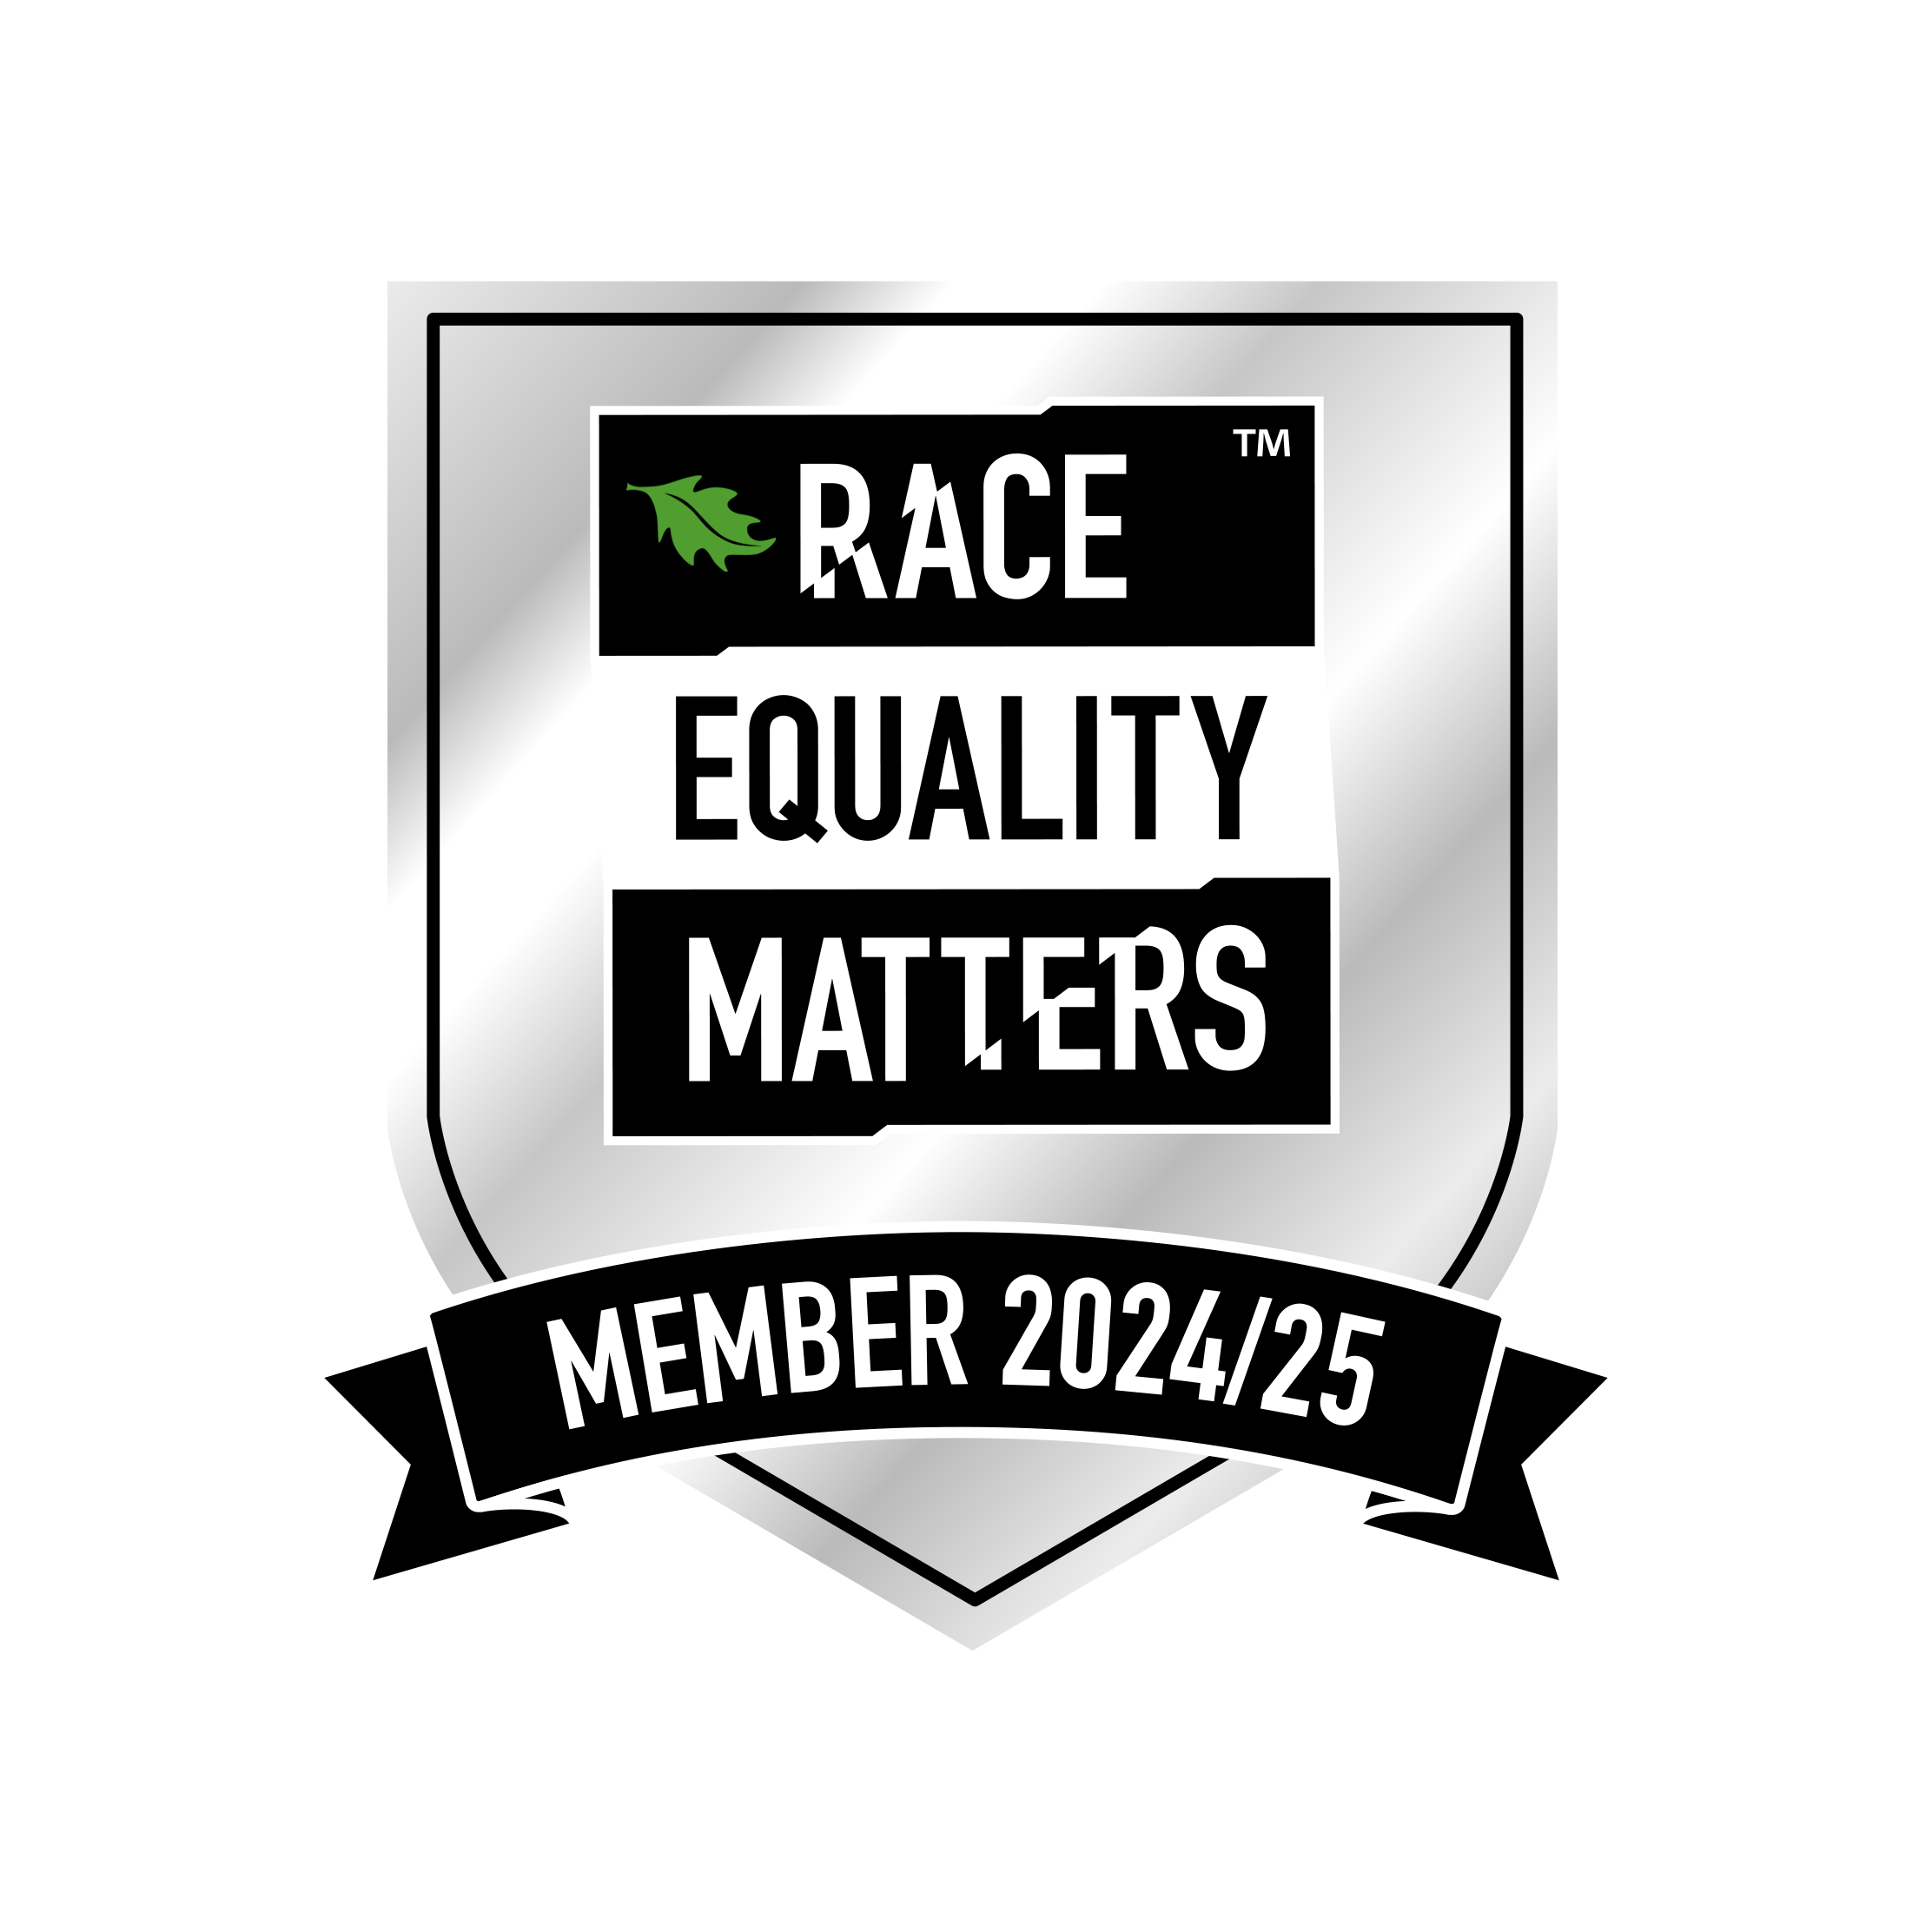 Race equality matters